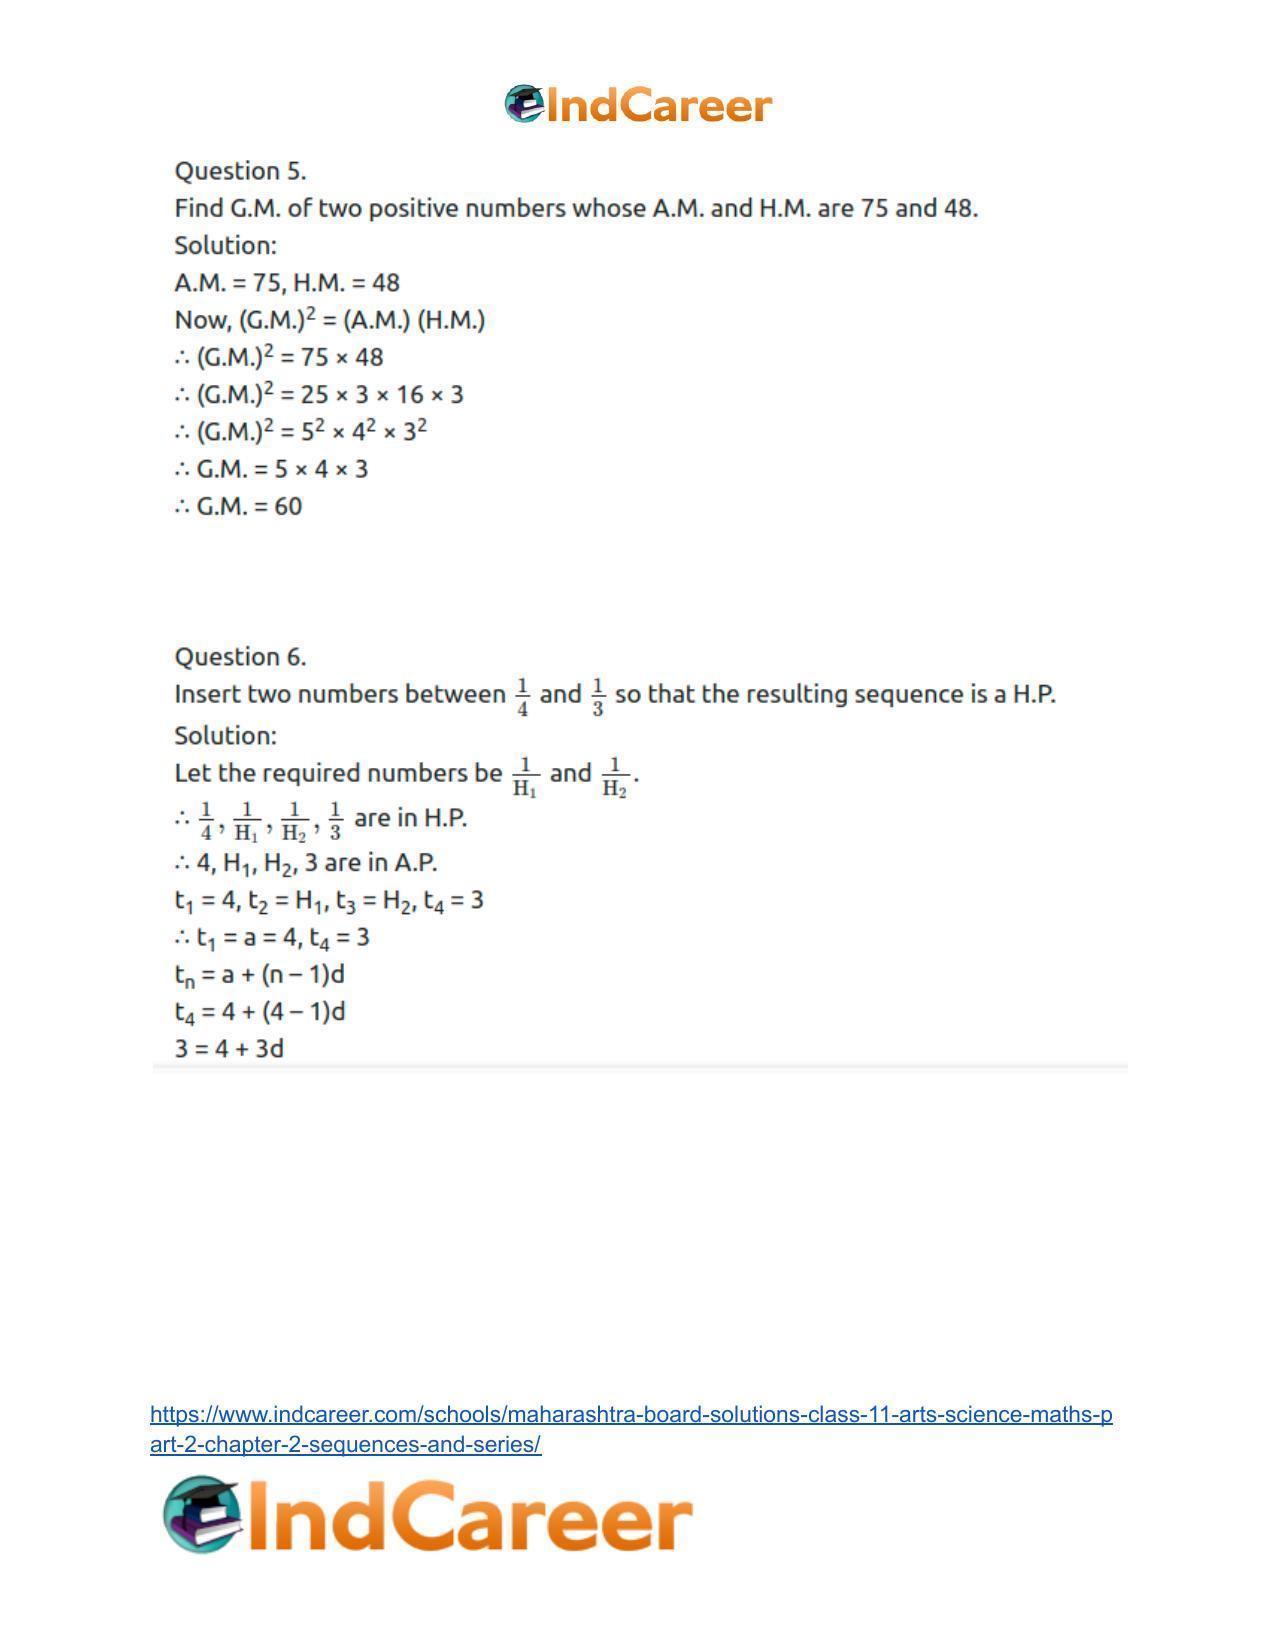 Maharashtra Board Solutions Class 11-Arts & Science Maths (Part 2): Chapter 2- Sequences and Series - Page 55